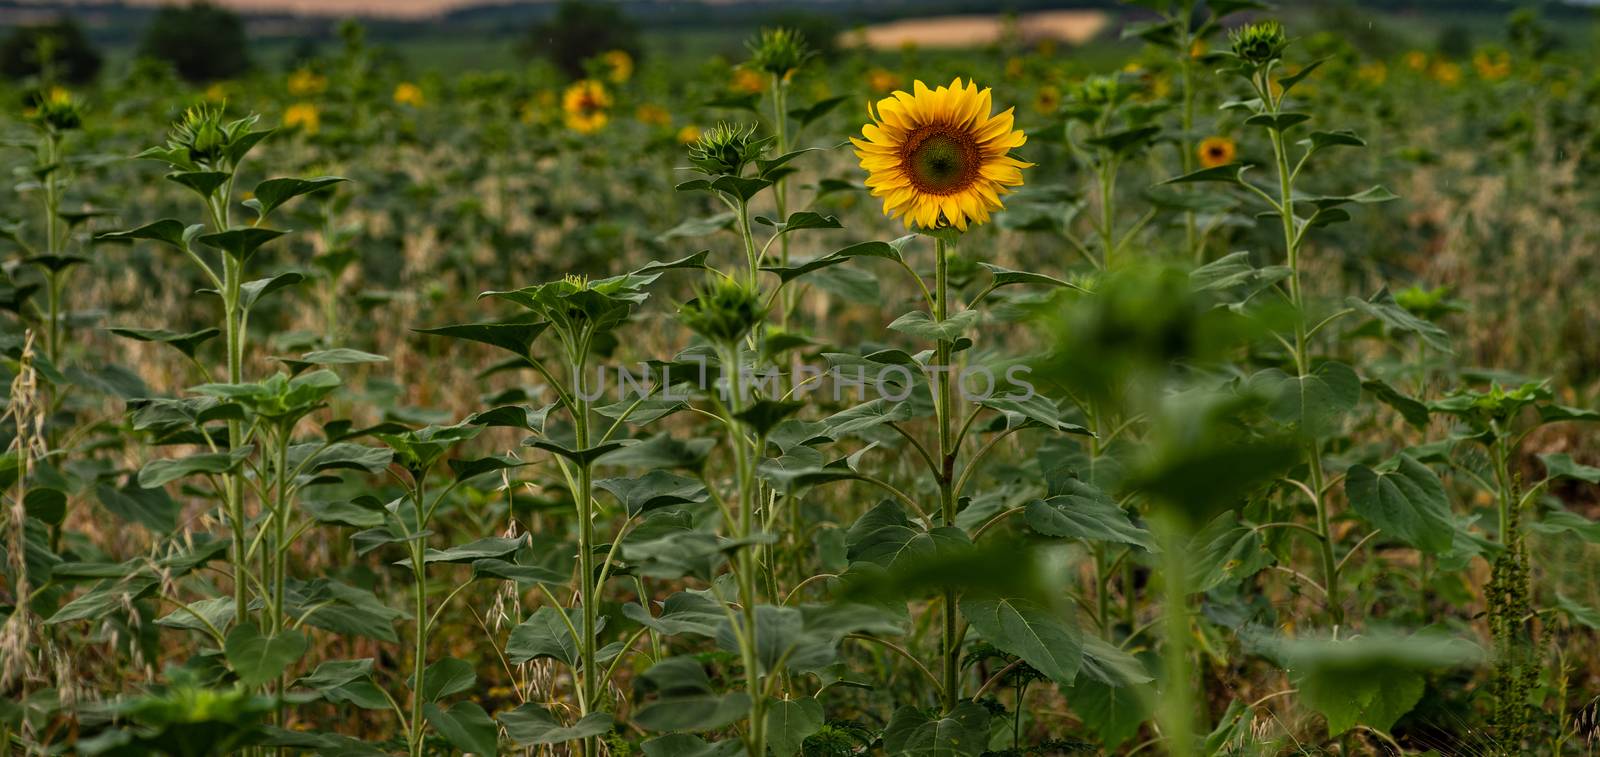 Blooming sunflowers in a field in the raining day